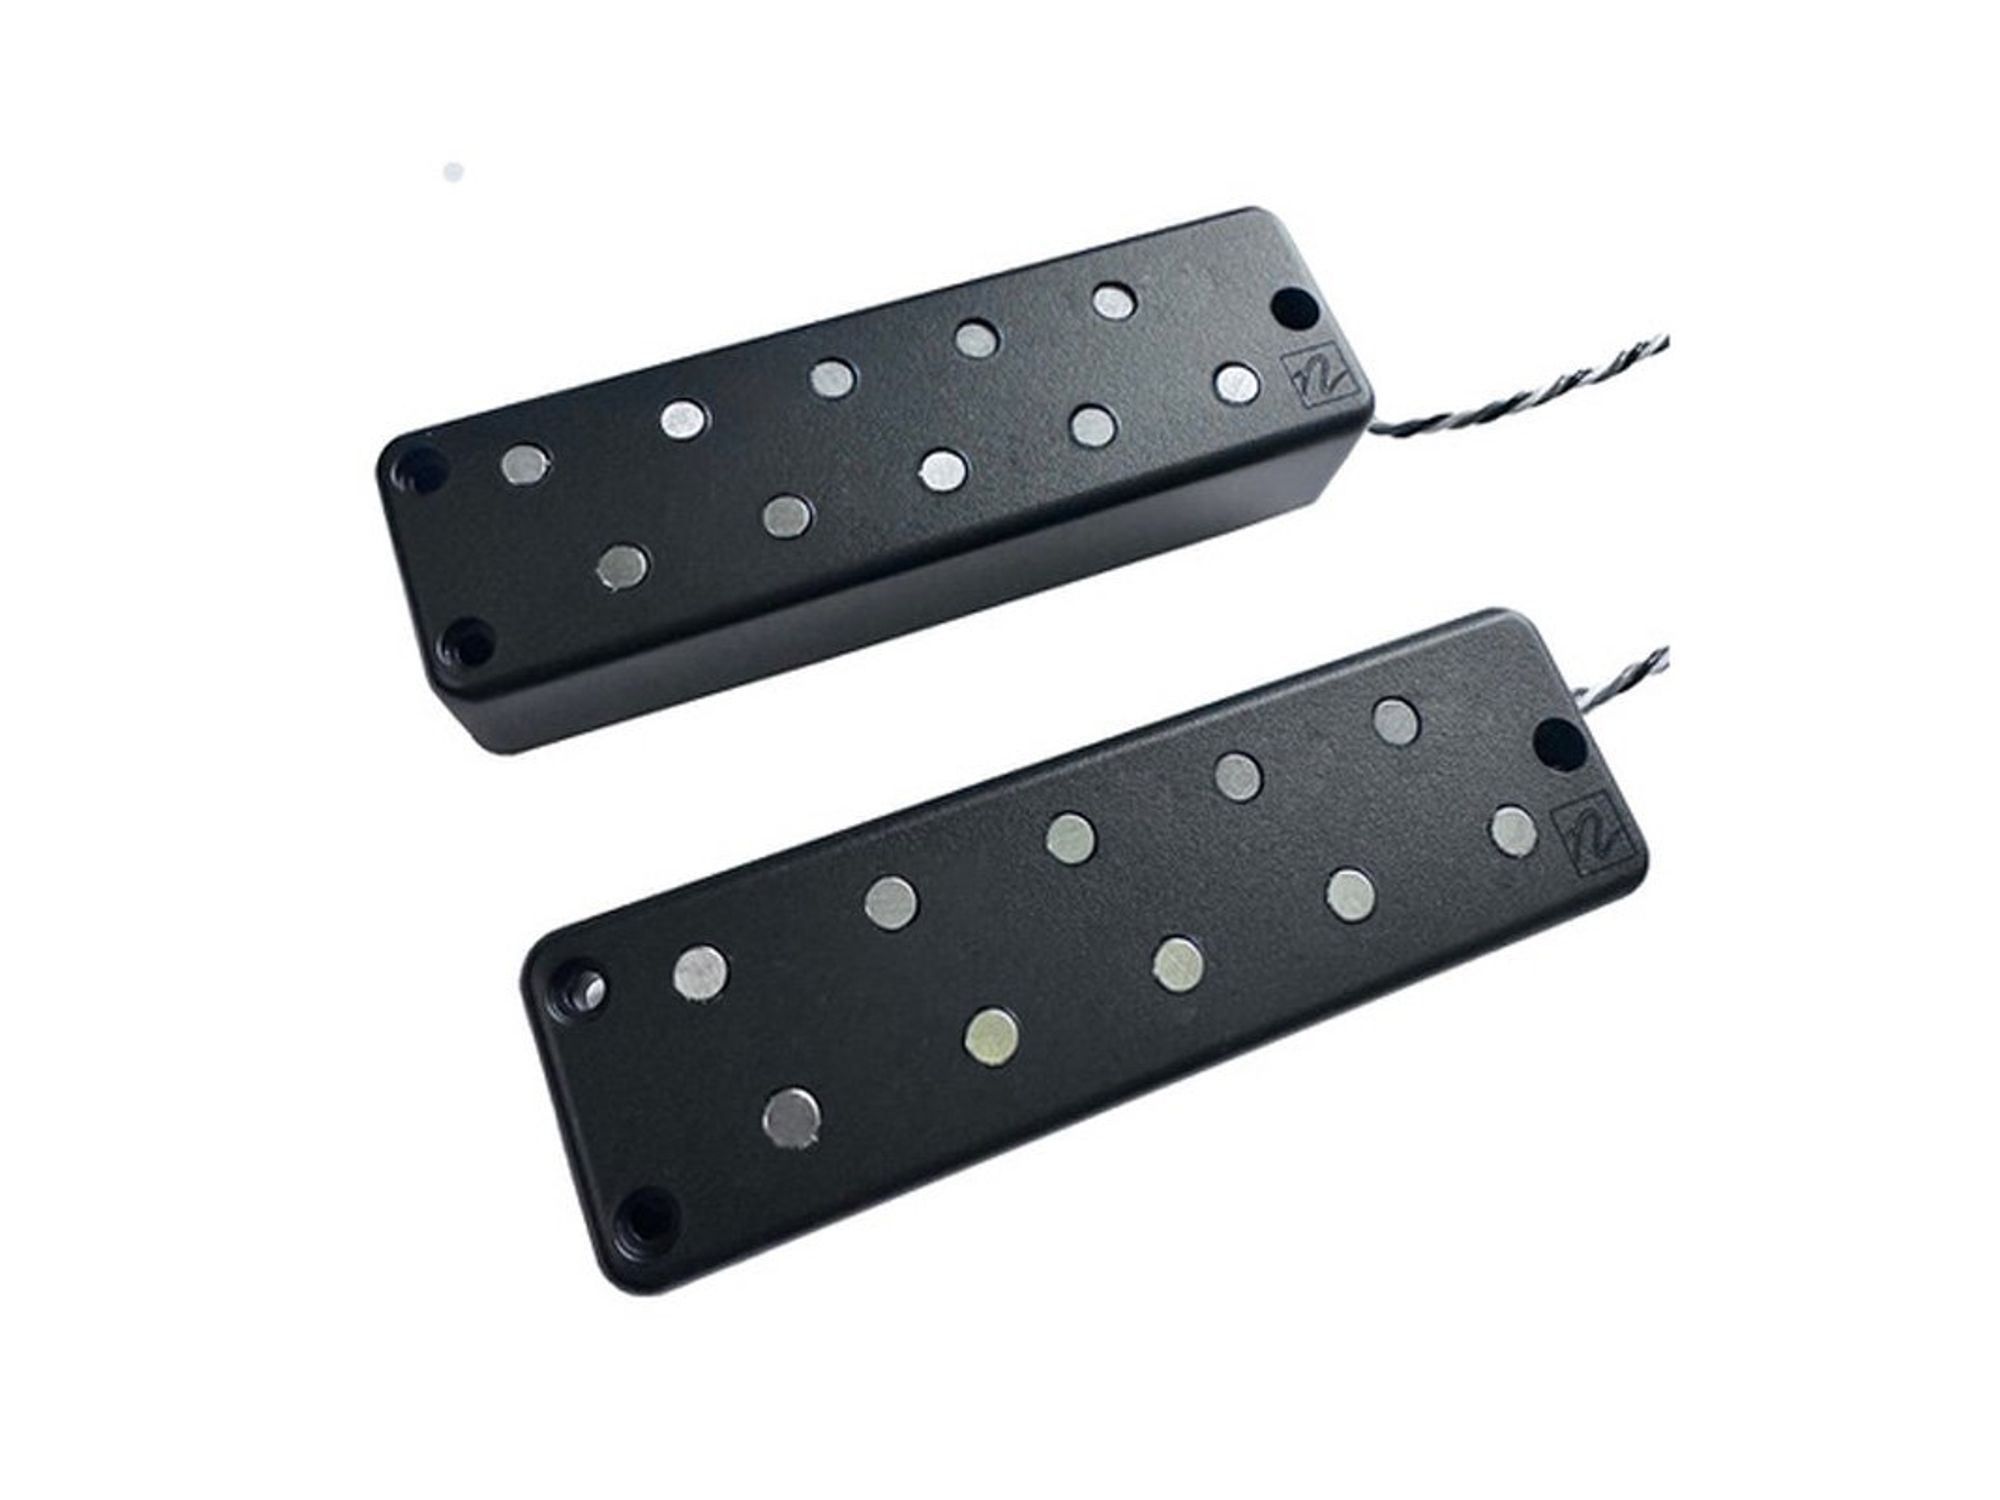 Nordstrand Audio Introduces PolyVox Multicoil Pickups